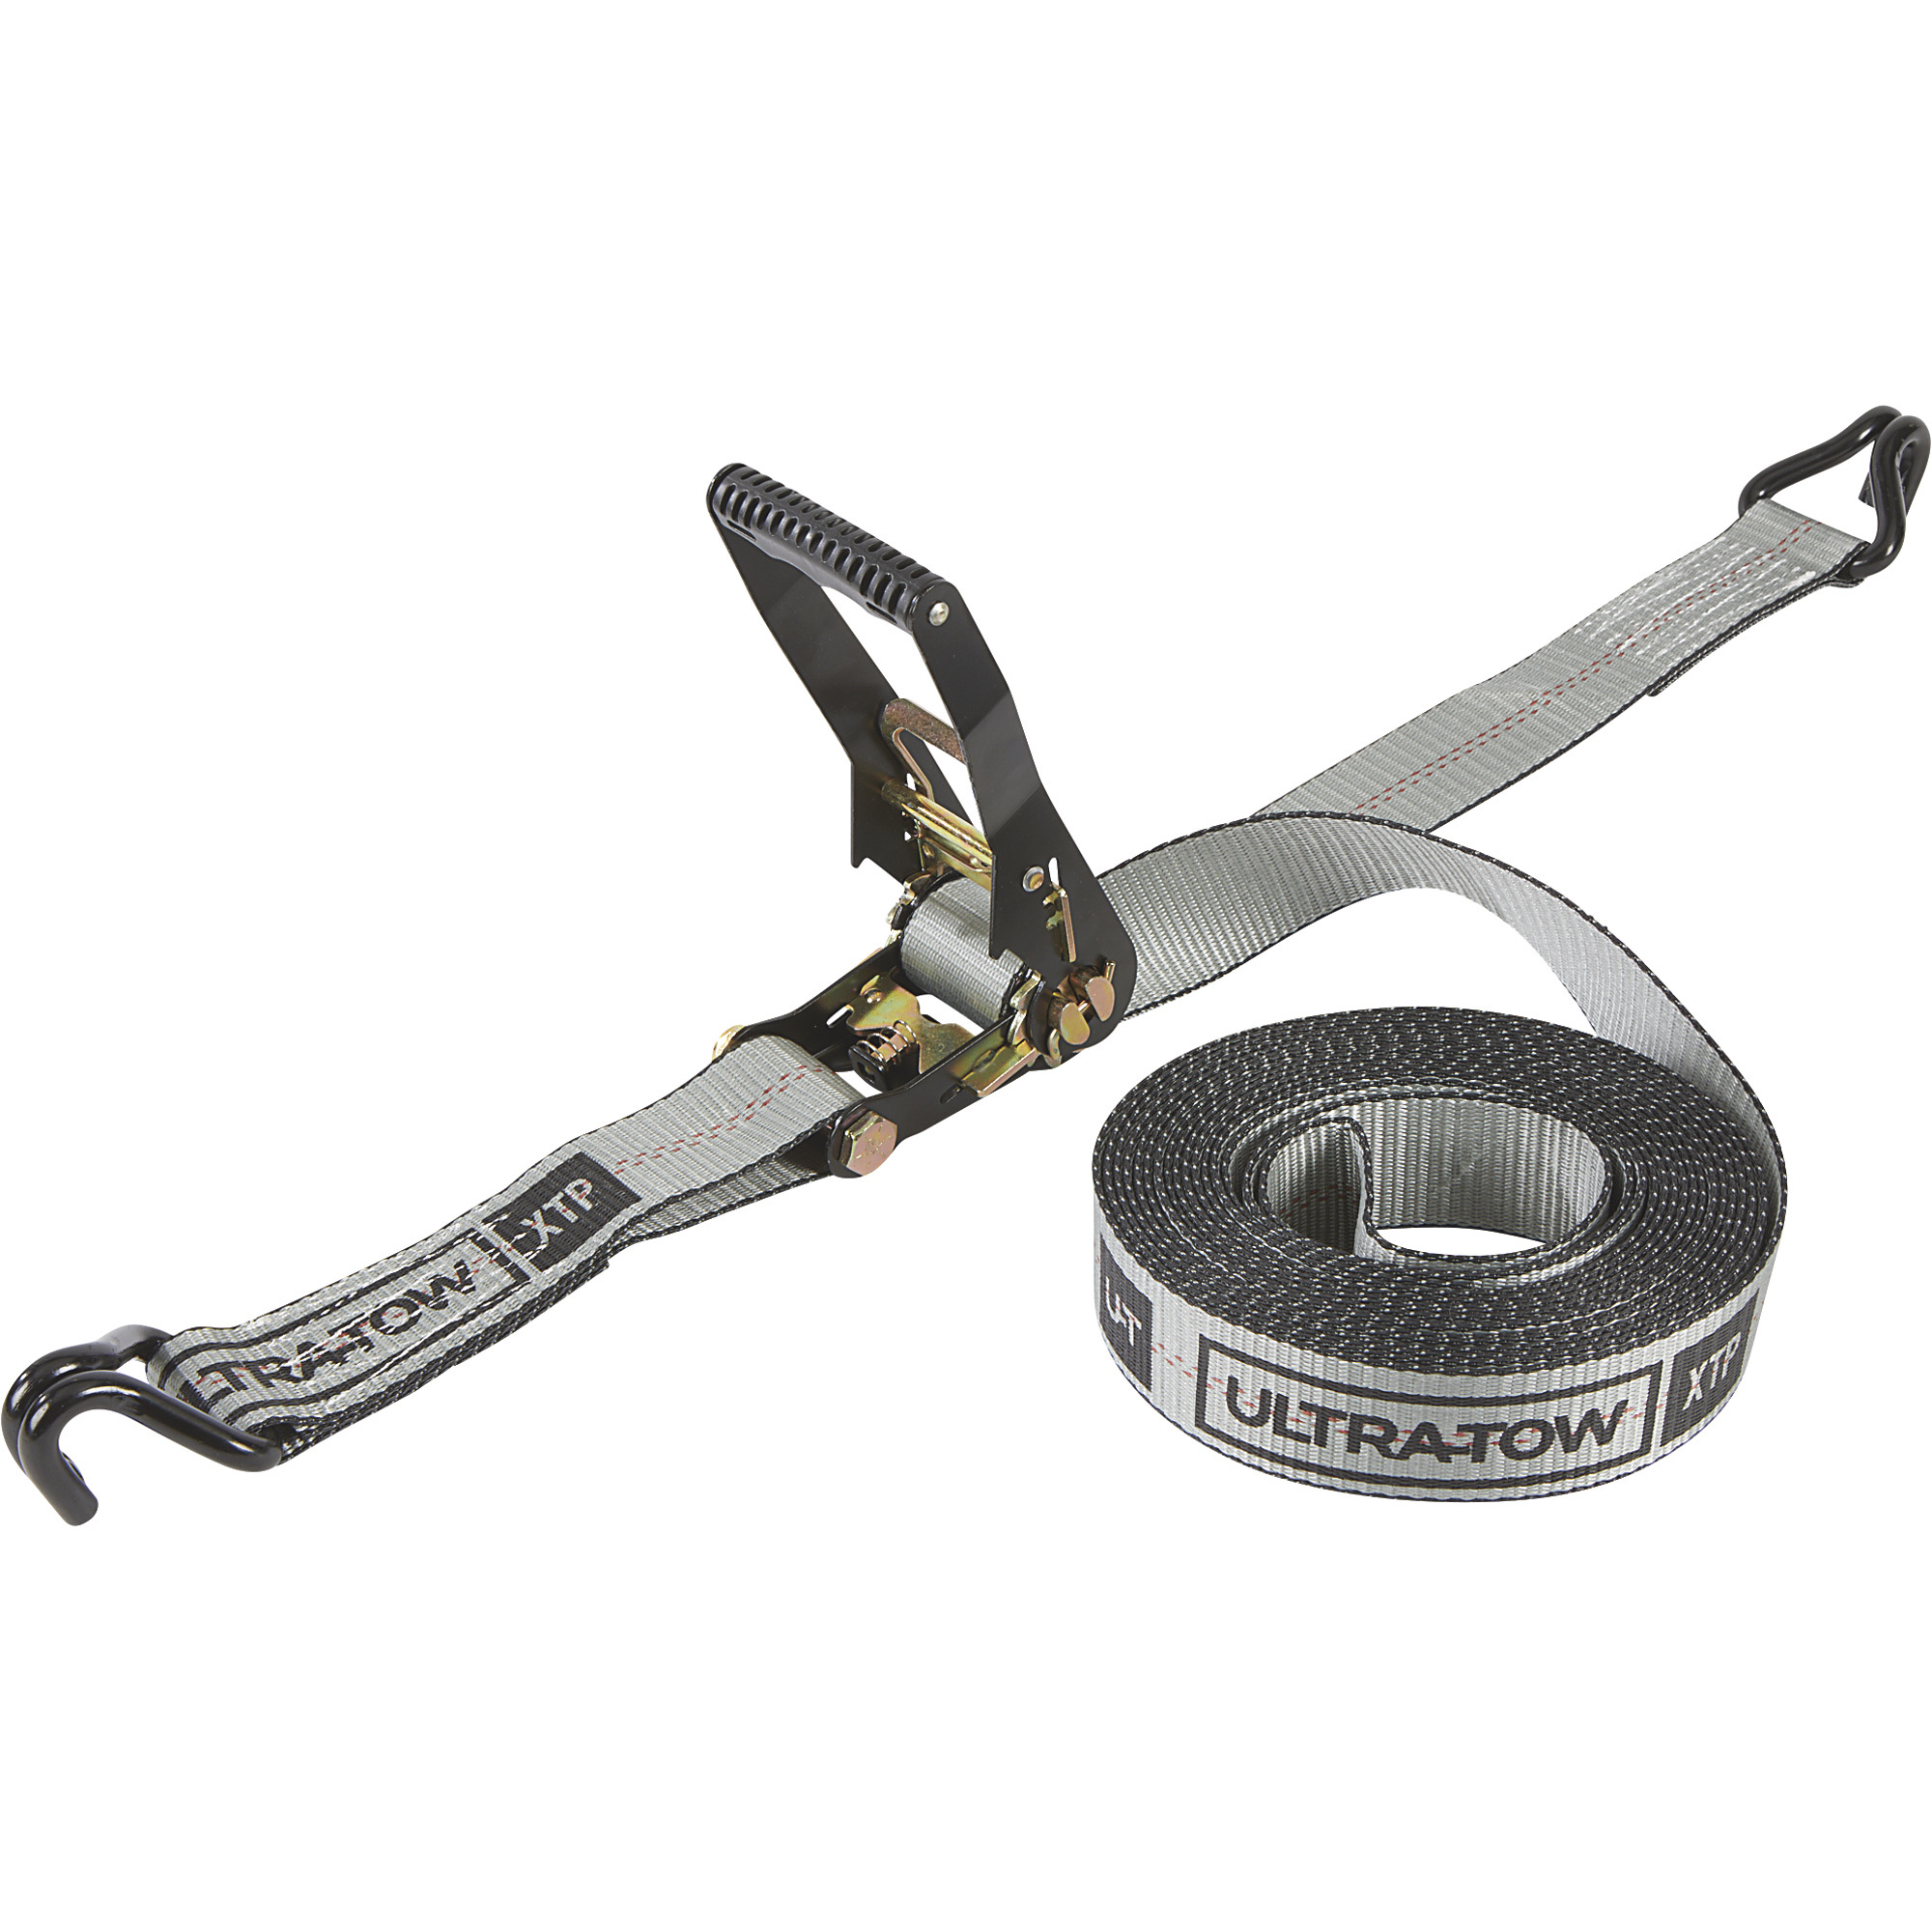 Ultra-Tow XTP 2Inch x 27ft. Ratchet Strap with J-Hooks,10,000-Lb. Breaking Strength, 3,300-Lb. Working Load, Gray, Model A810301